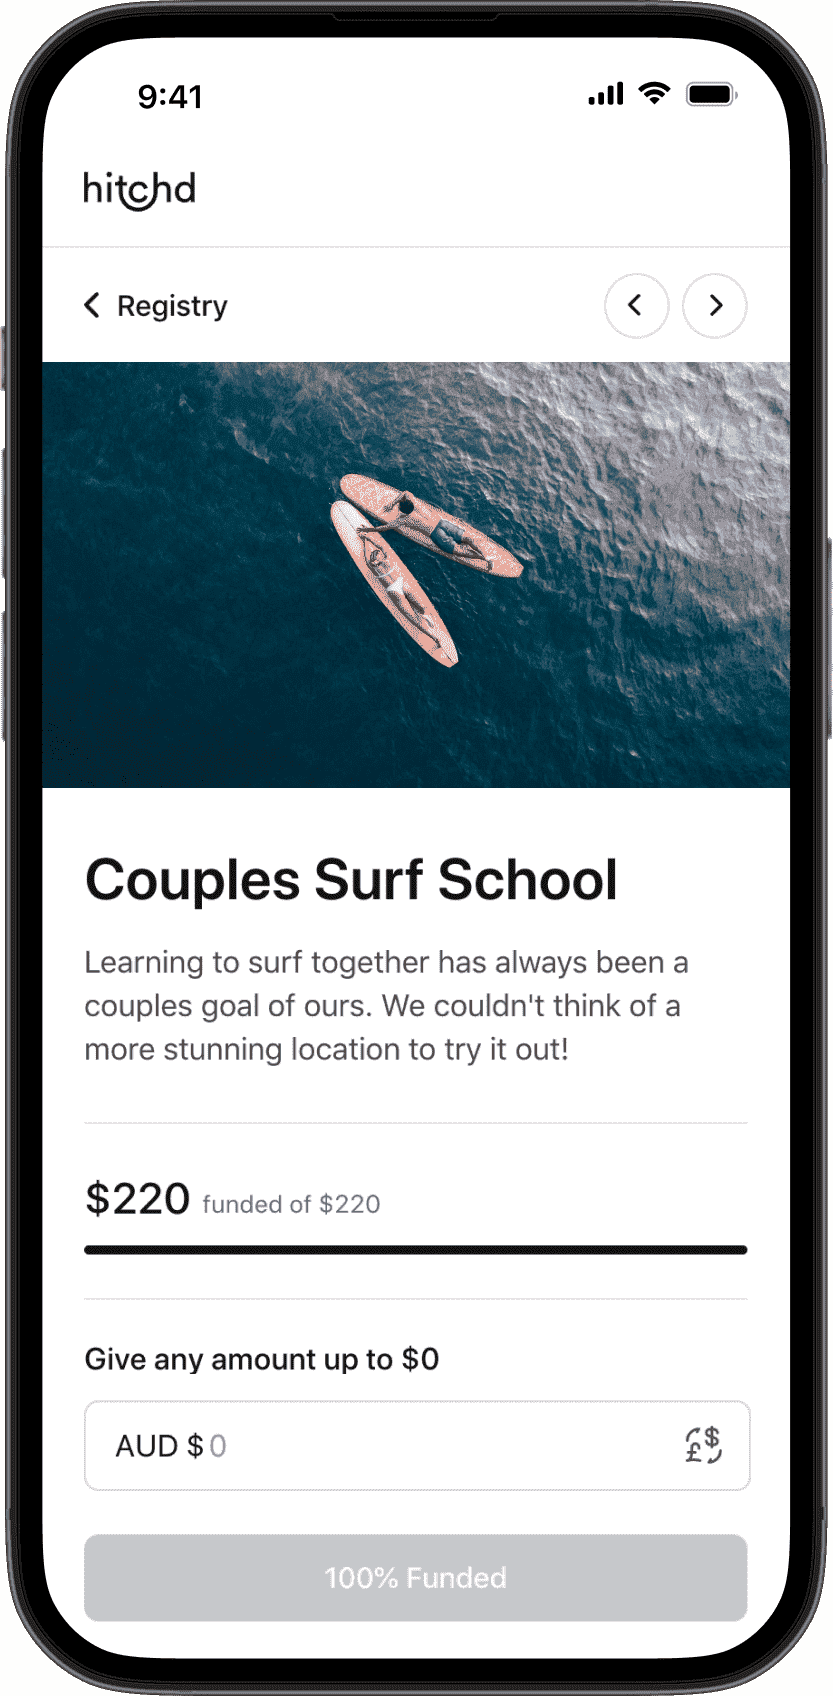 A couples surf school experience